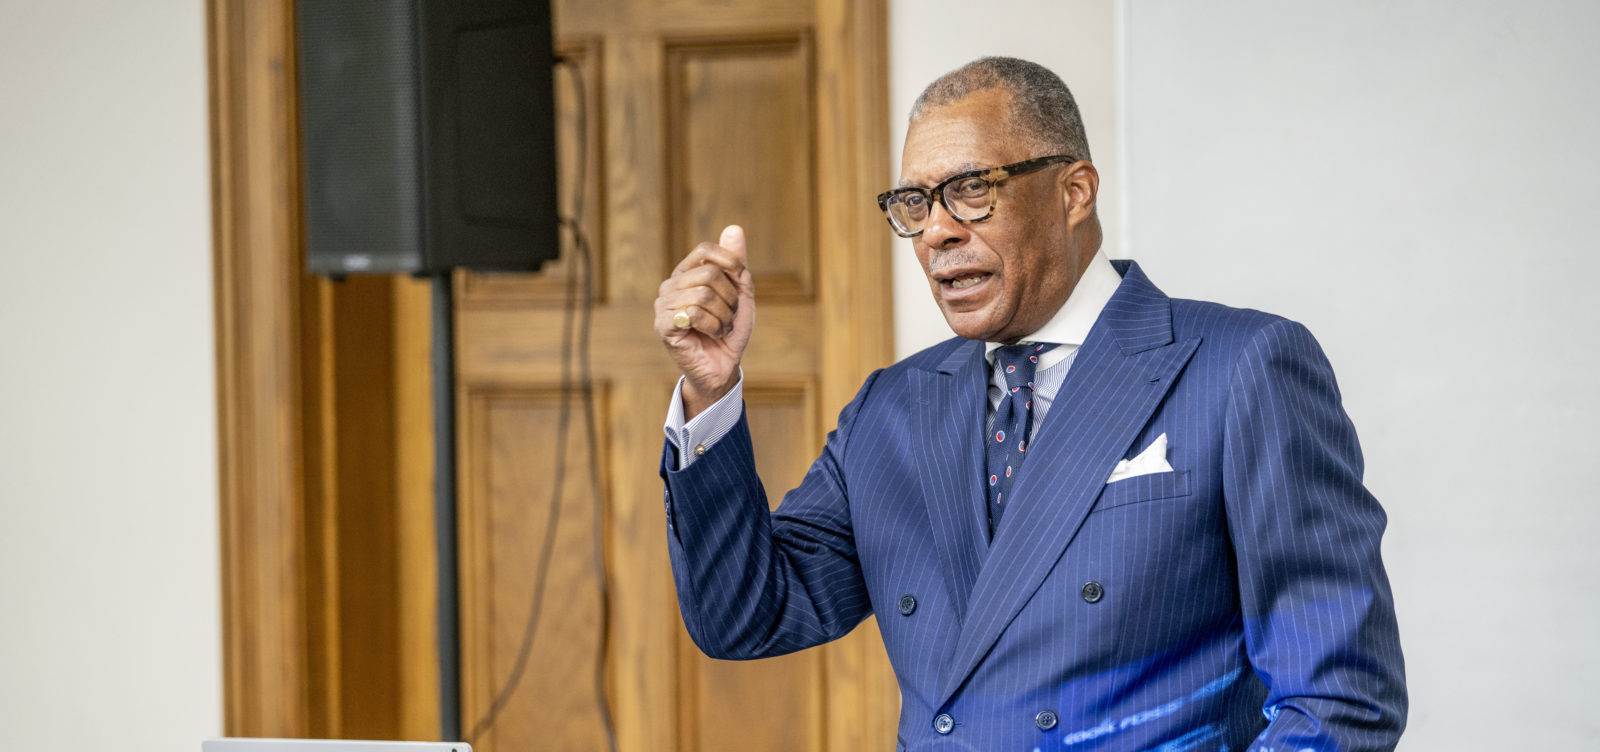 Dr. André L. Churchwell, interim vice chancellor for equity, diversity and inclusion and chief diversity officer, welcomes participants to day one of the unconscious bias training held at Scarritt Bennet Center. (John Russell/Vanderbilt University)